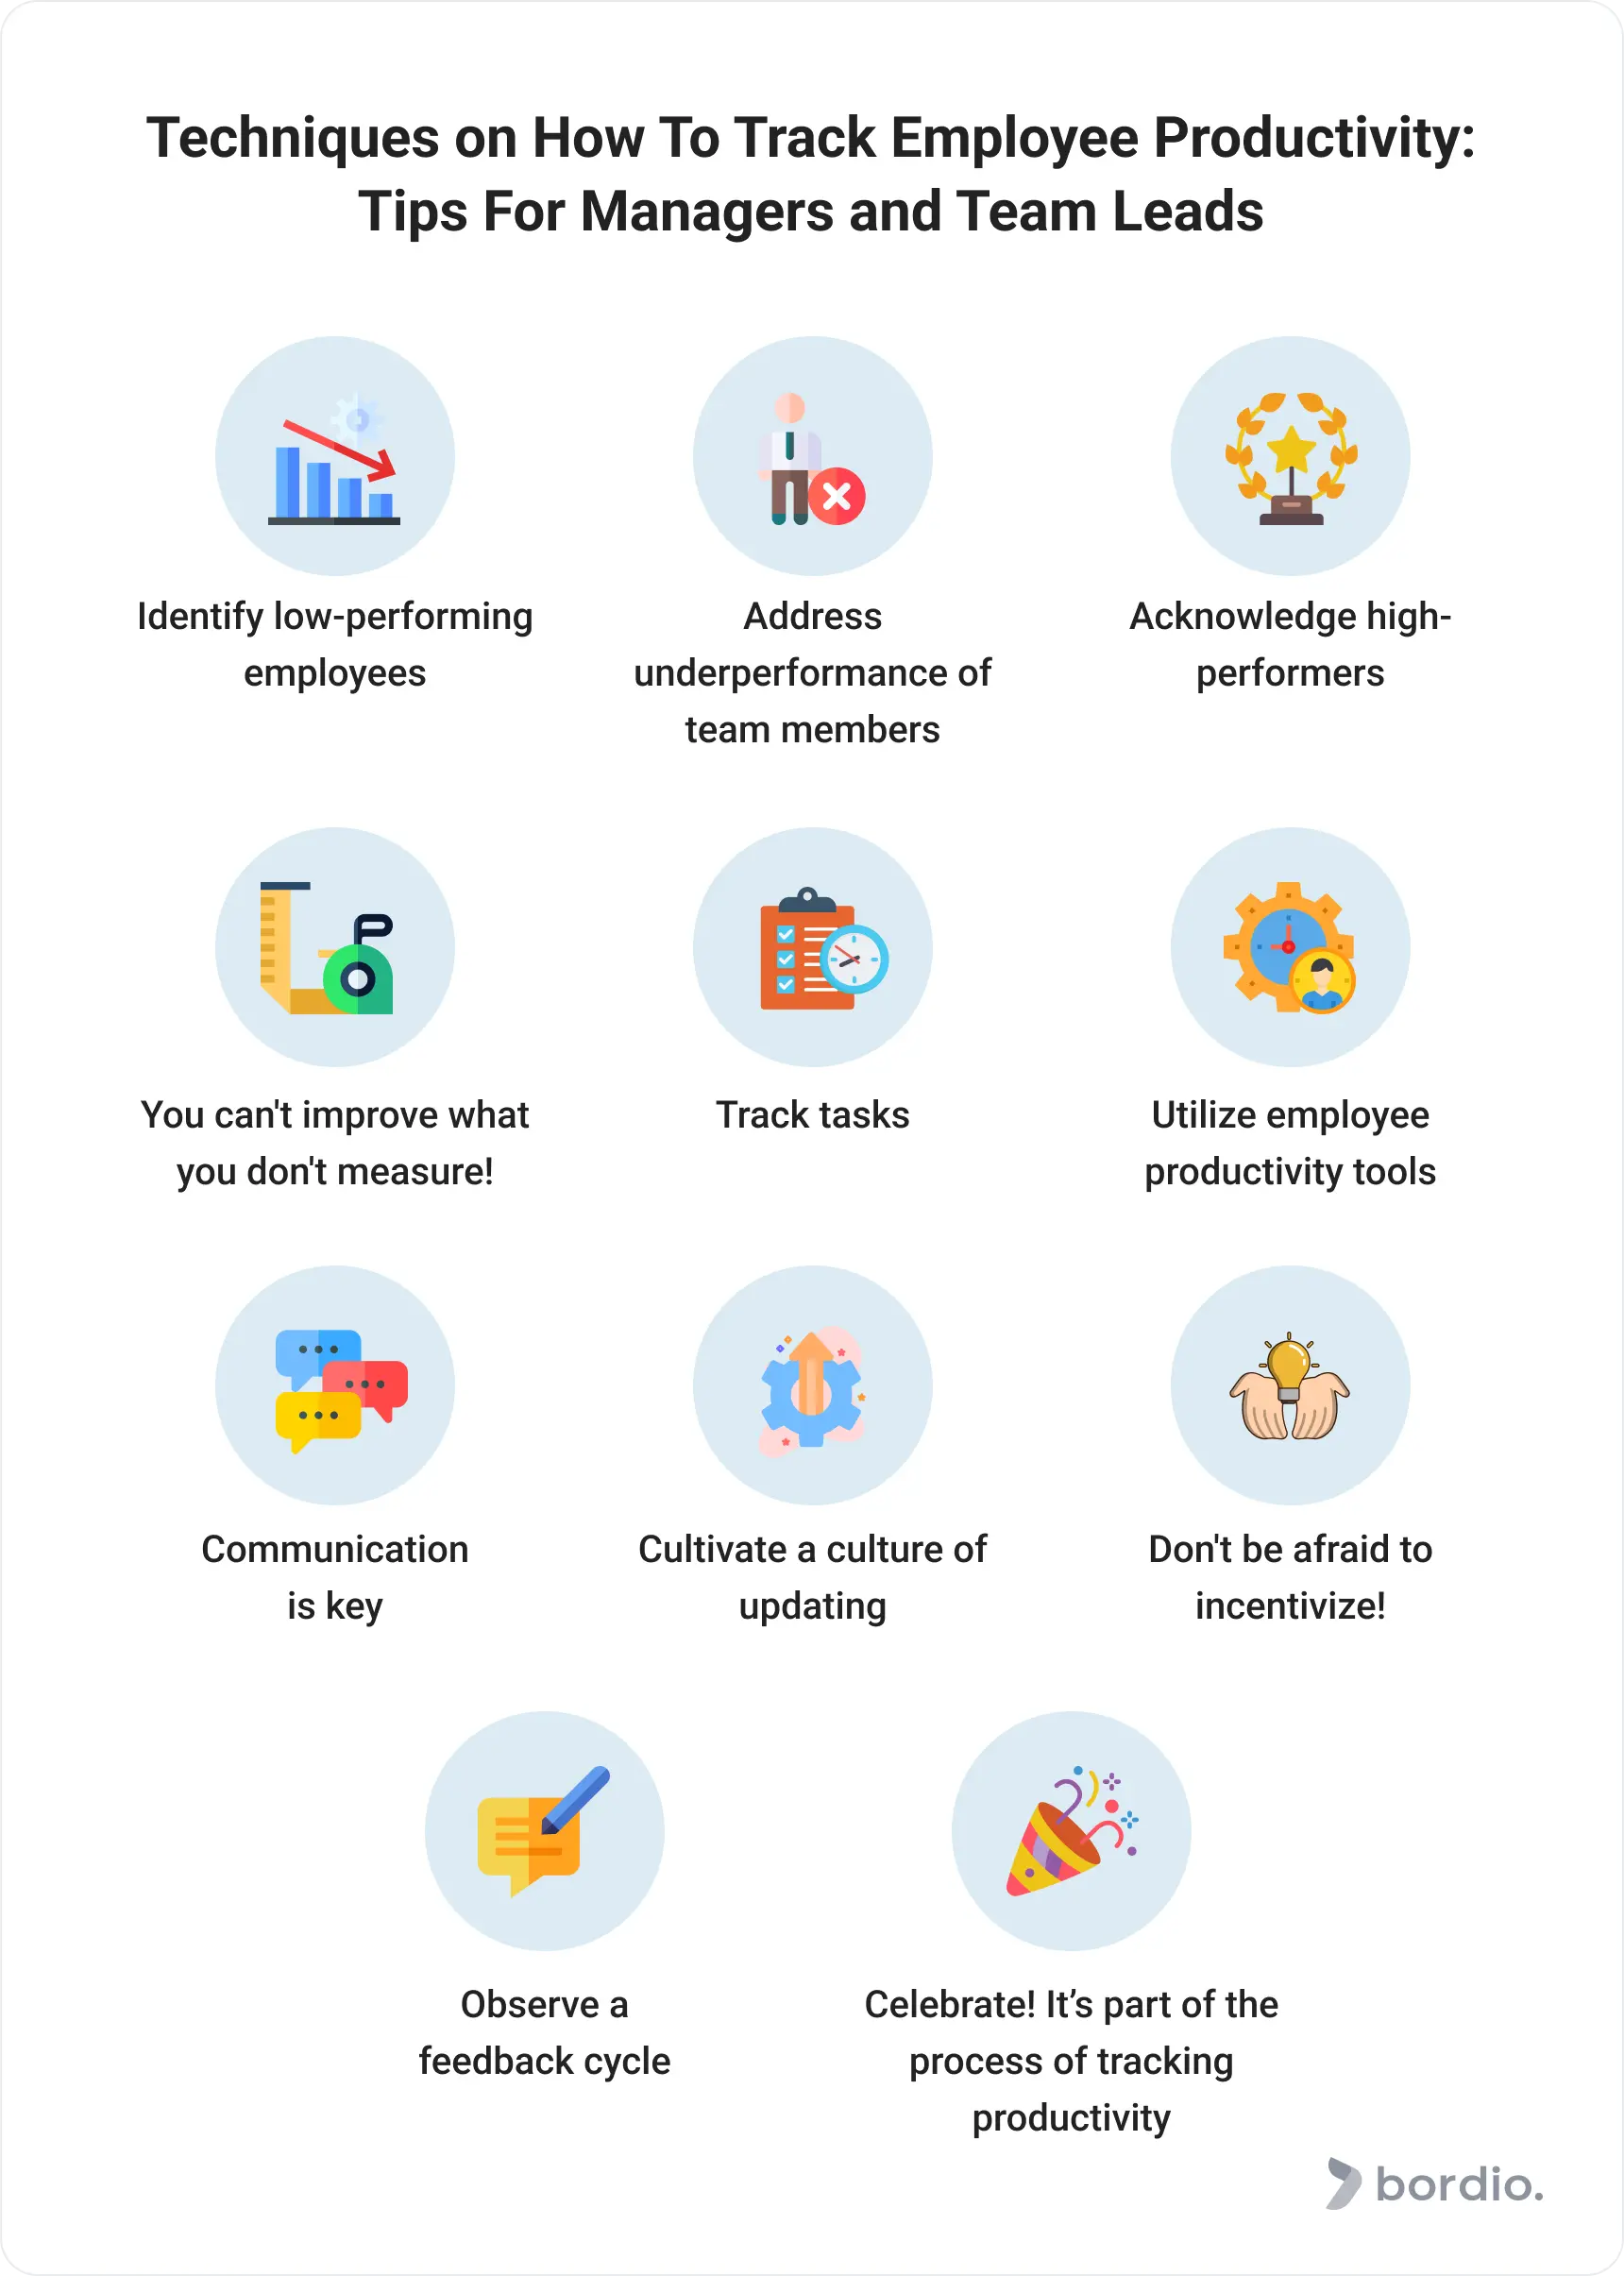 Here are some techniques on how to track employee productivity that you can use to help your employees improve their work.